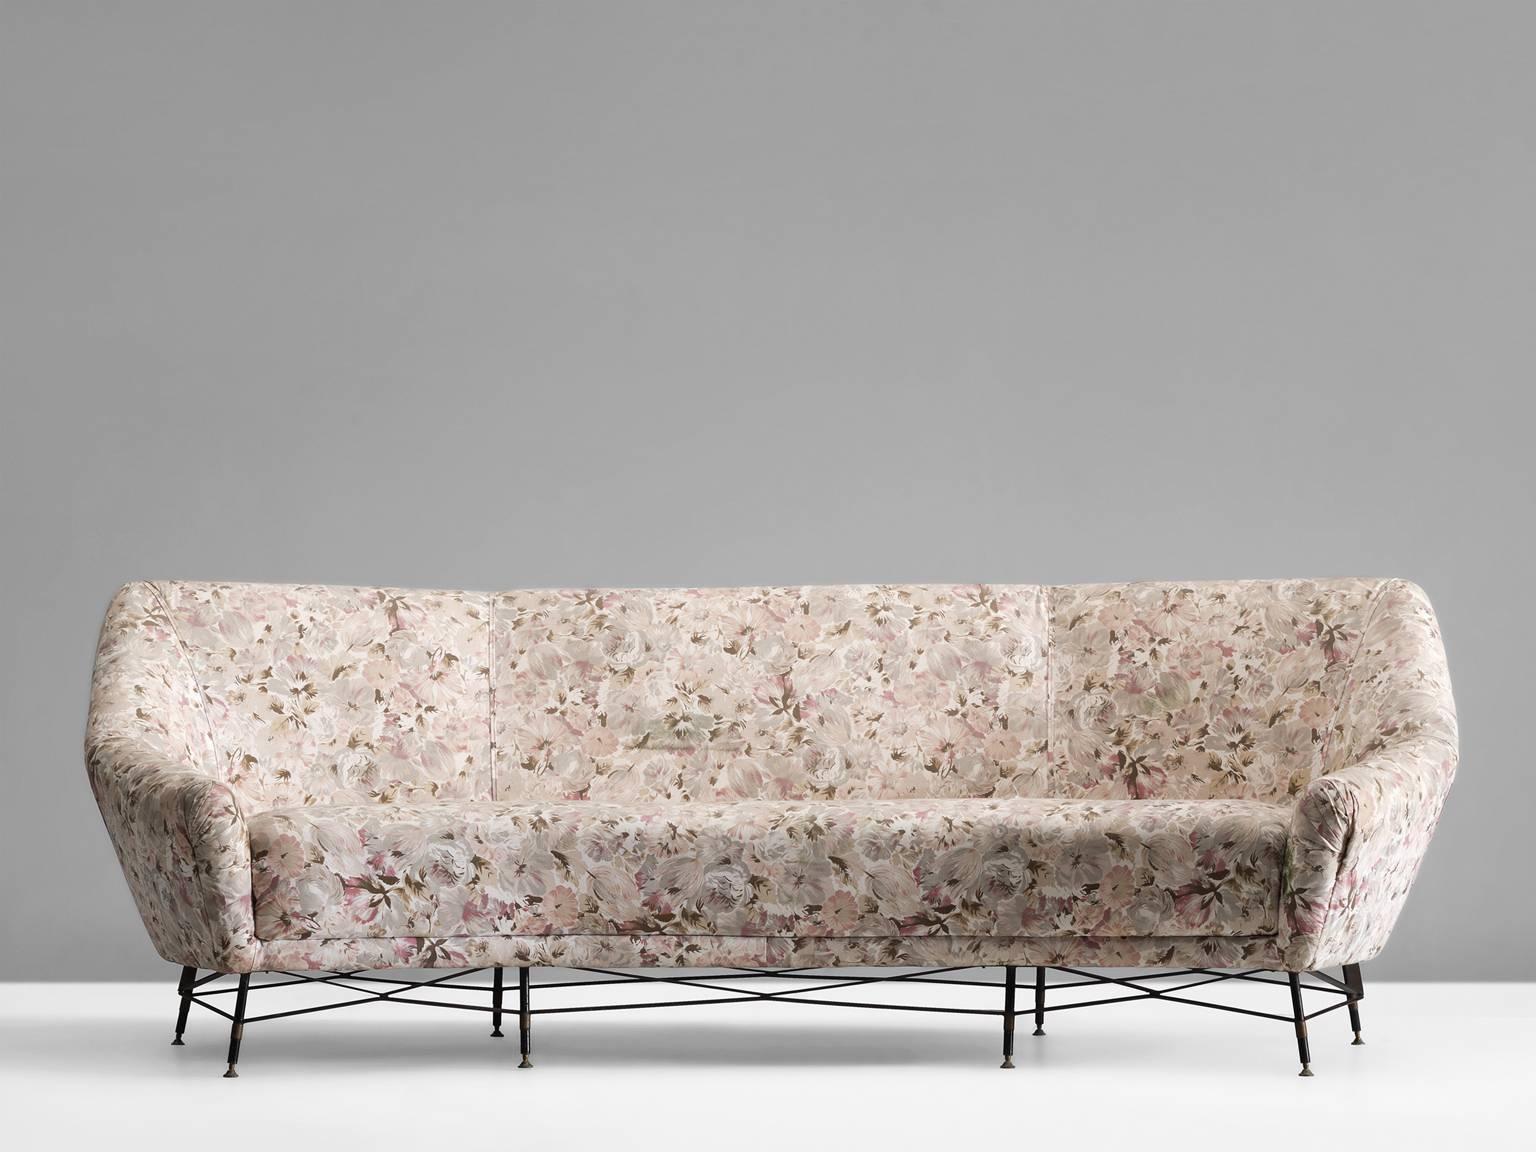 Sofa, in metal, brass and fabric, Italy, 1950s.

Large curved sofa with beautiful metal wire frame. This sofa has an elegant base of black coated metal with brass elements. The lines of the base show an interesting graphical pattern. The seating is